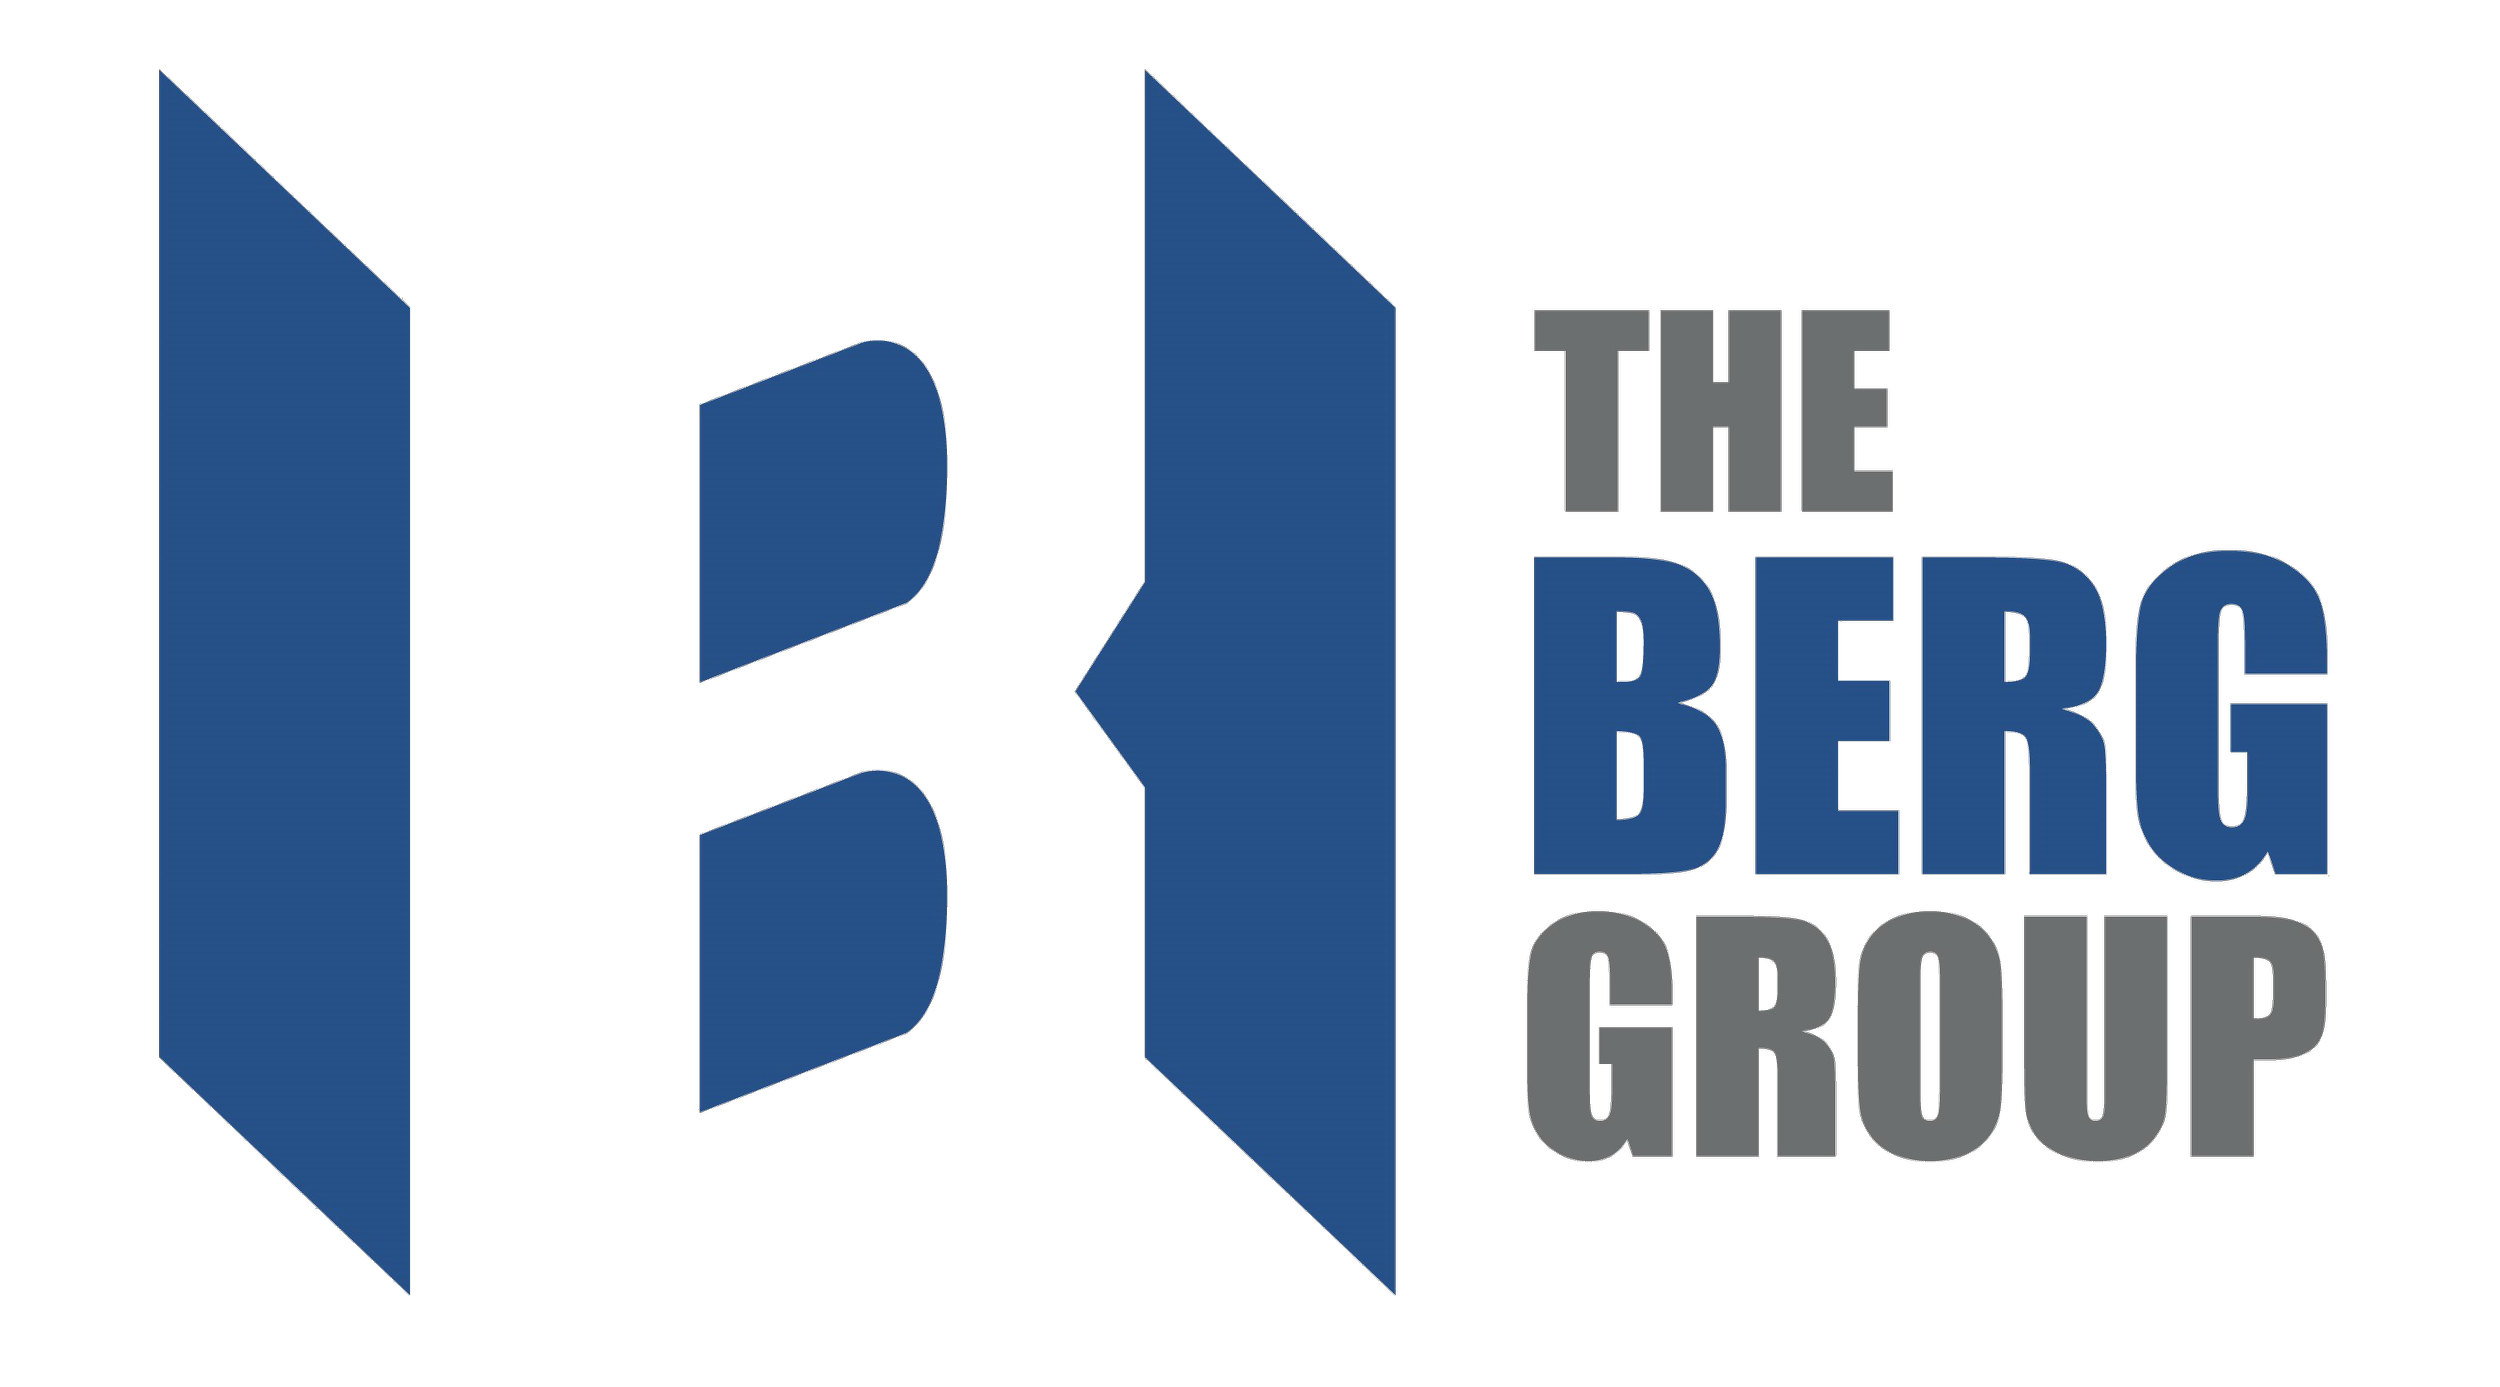 The Berg Group